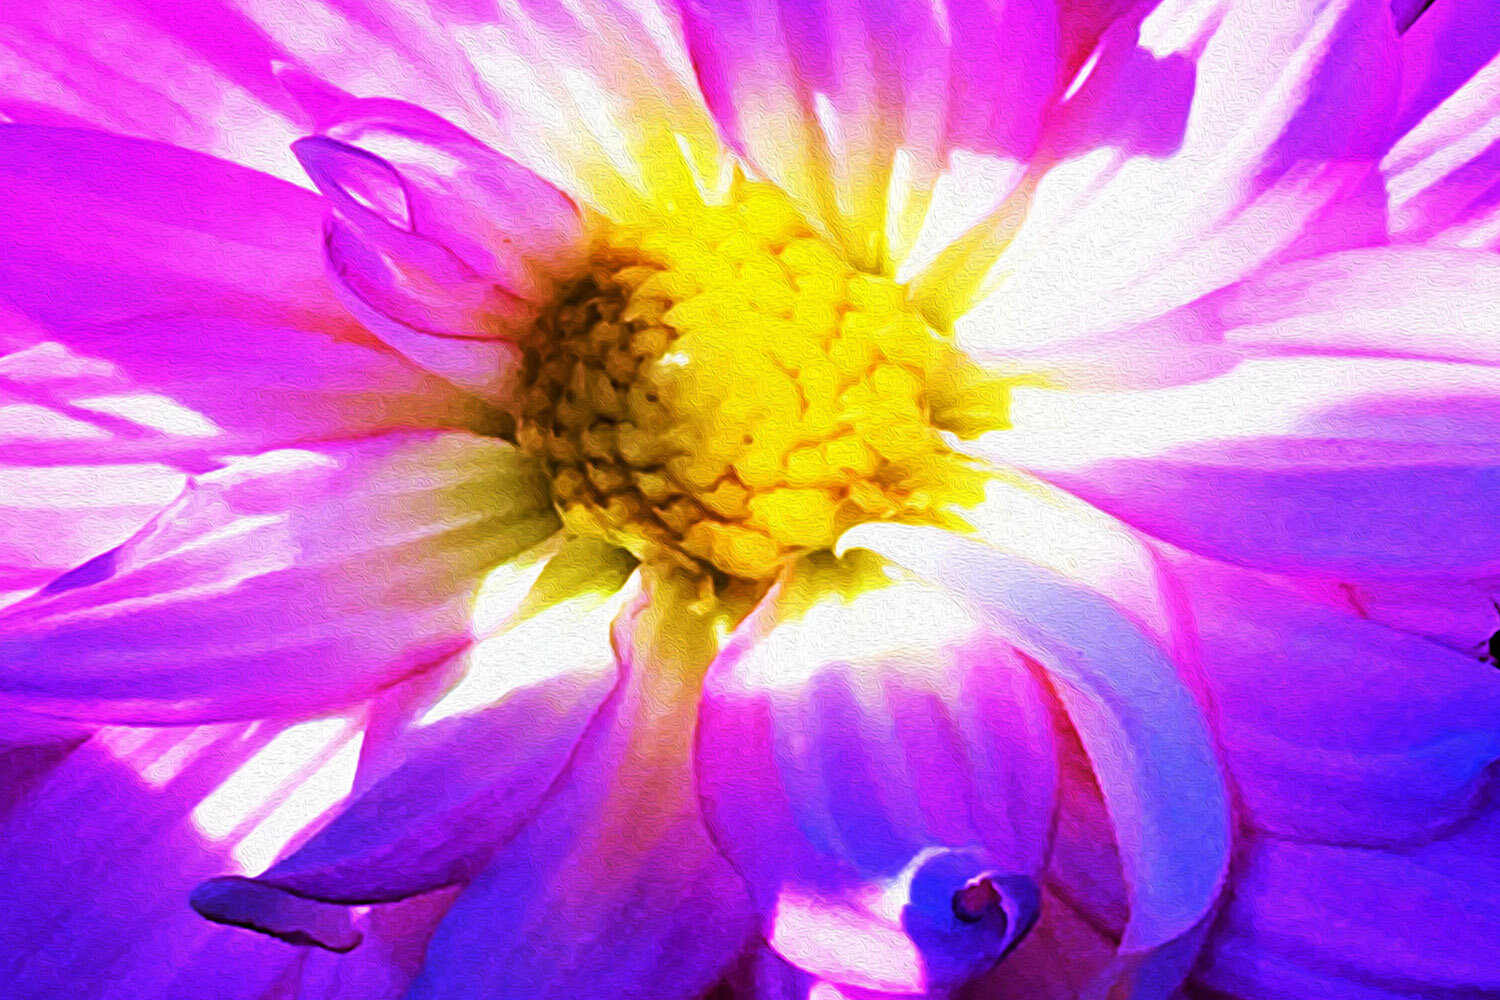 Purple and White Dahlia with a Bright Yellow Center